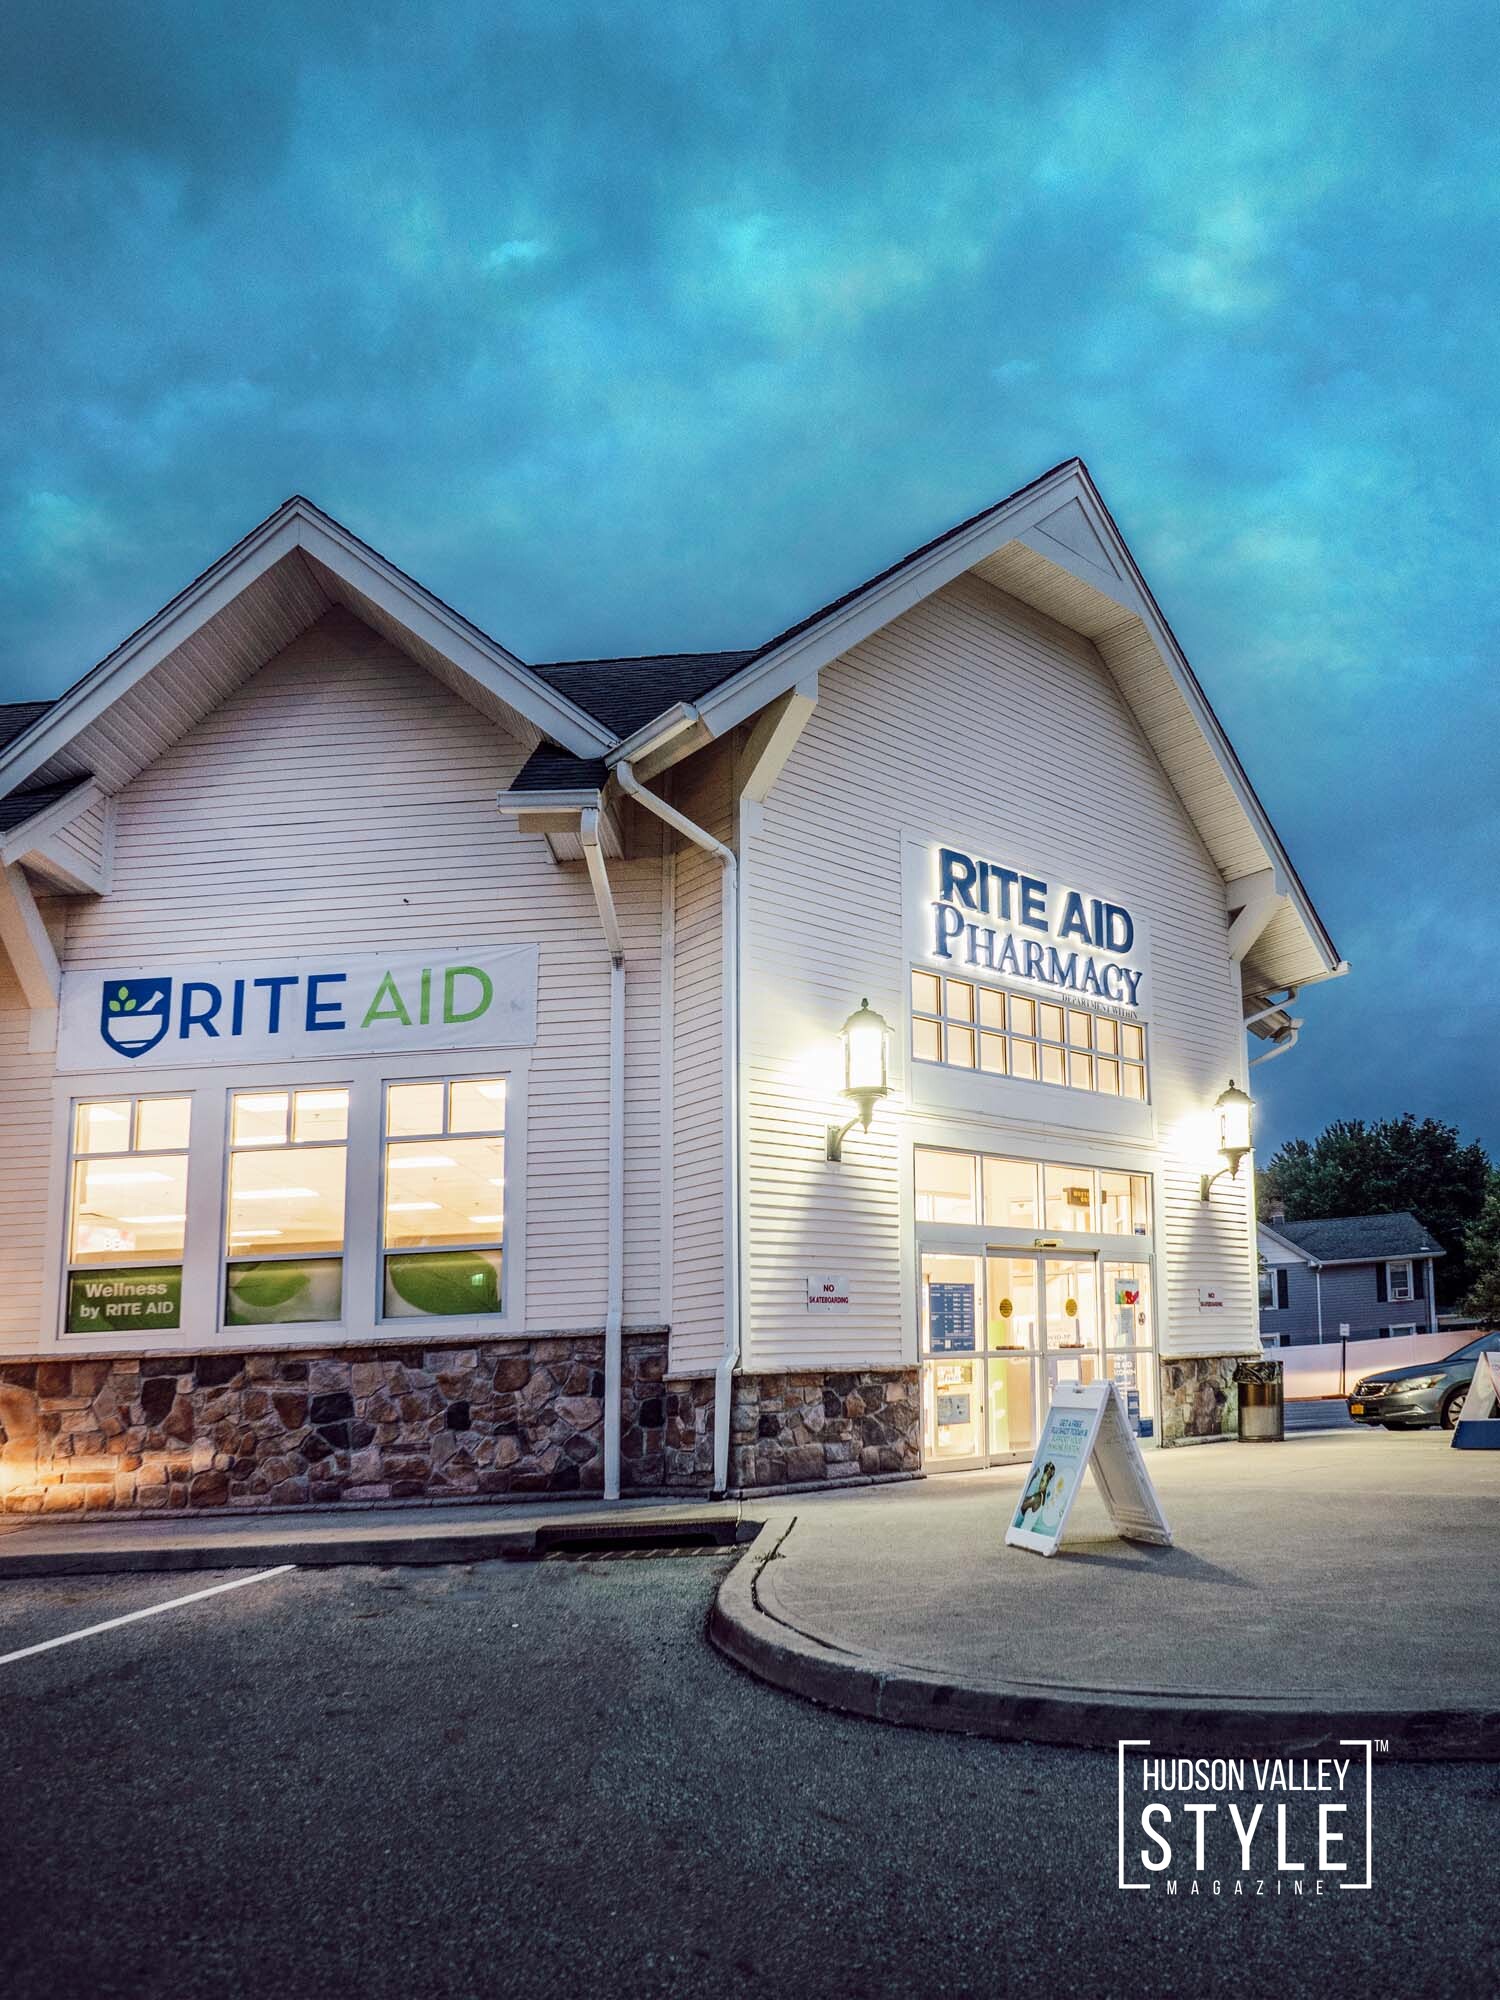 Rite Aid Hudson Valley – Twilight Photography – Commercial Real Estate Photography Project by Duncan Avenue Studios – Hudson Valley, Catskills, and Westchester, New York